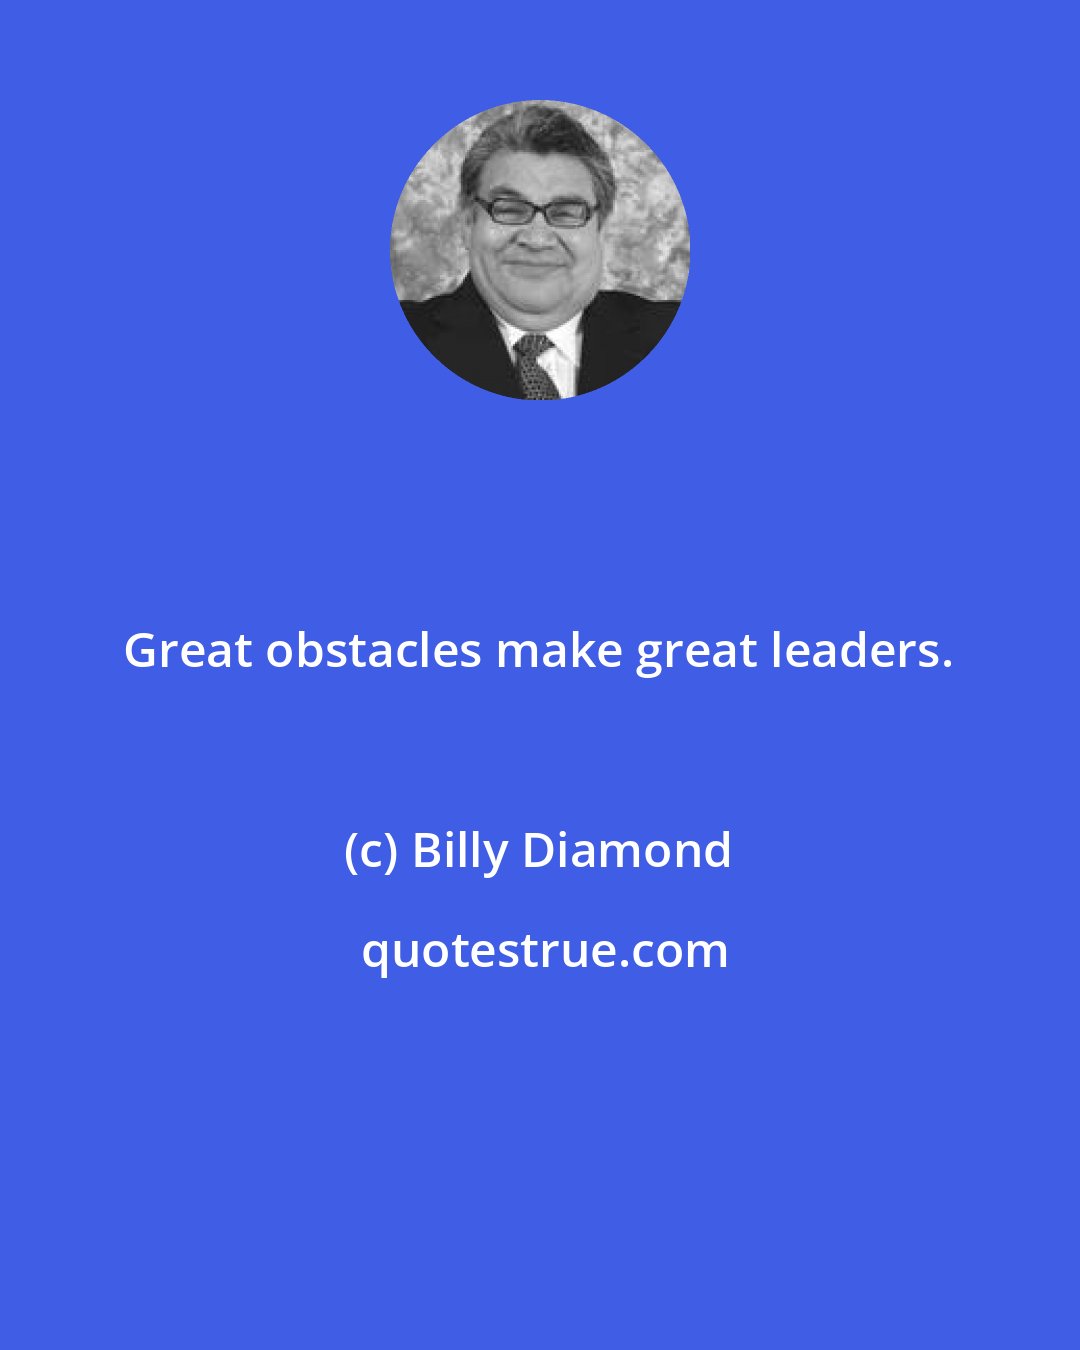 Billy Diamond: Great obstacles make great leaders.